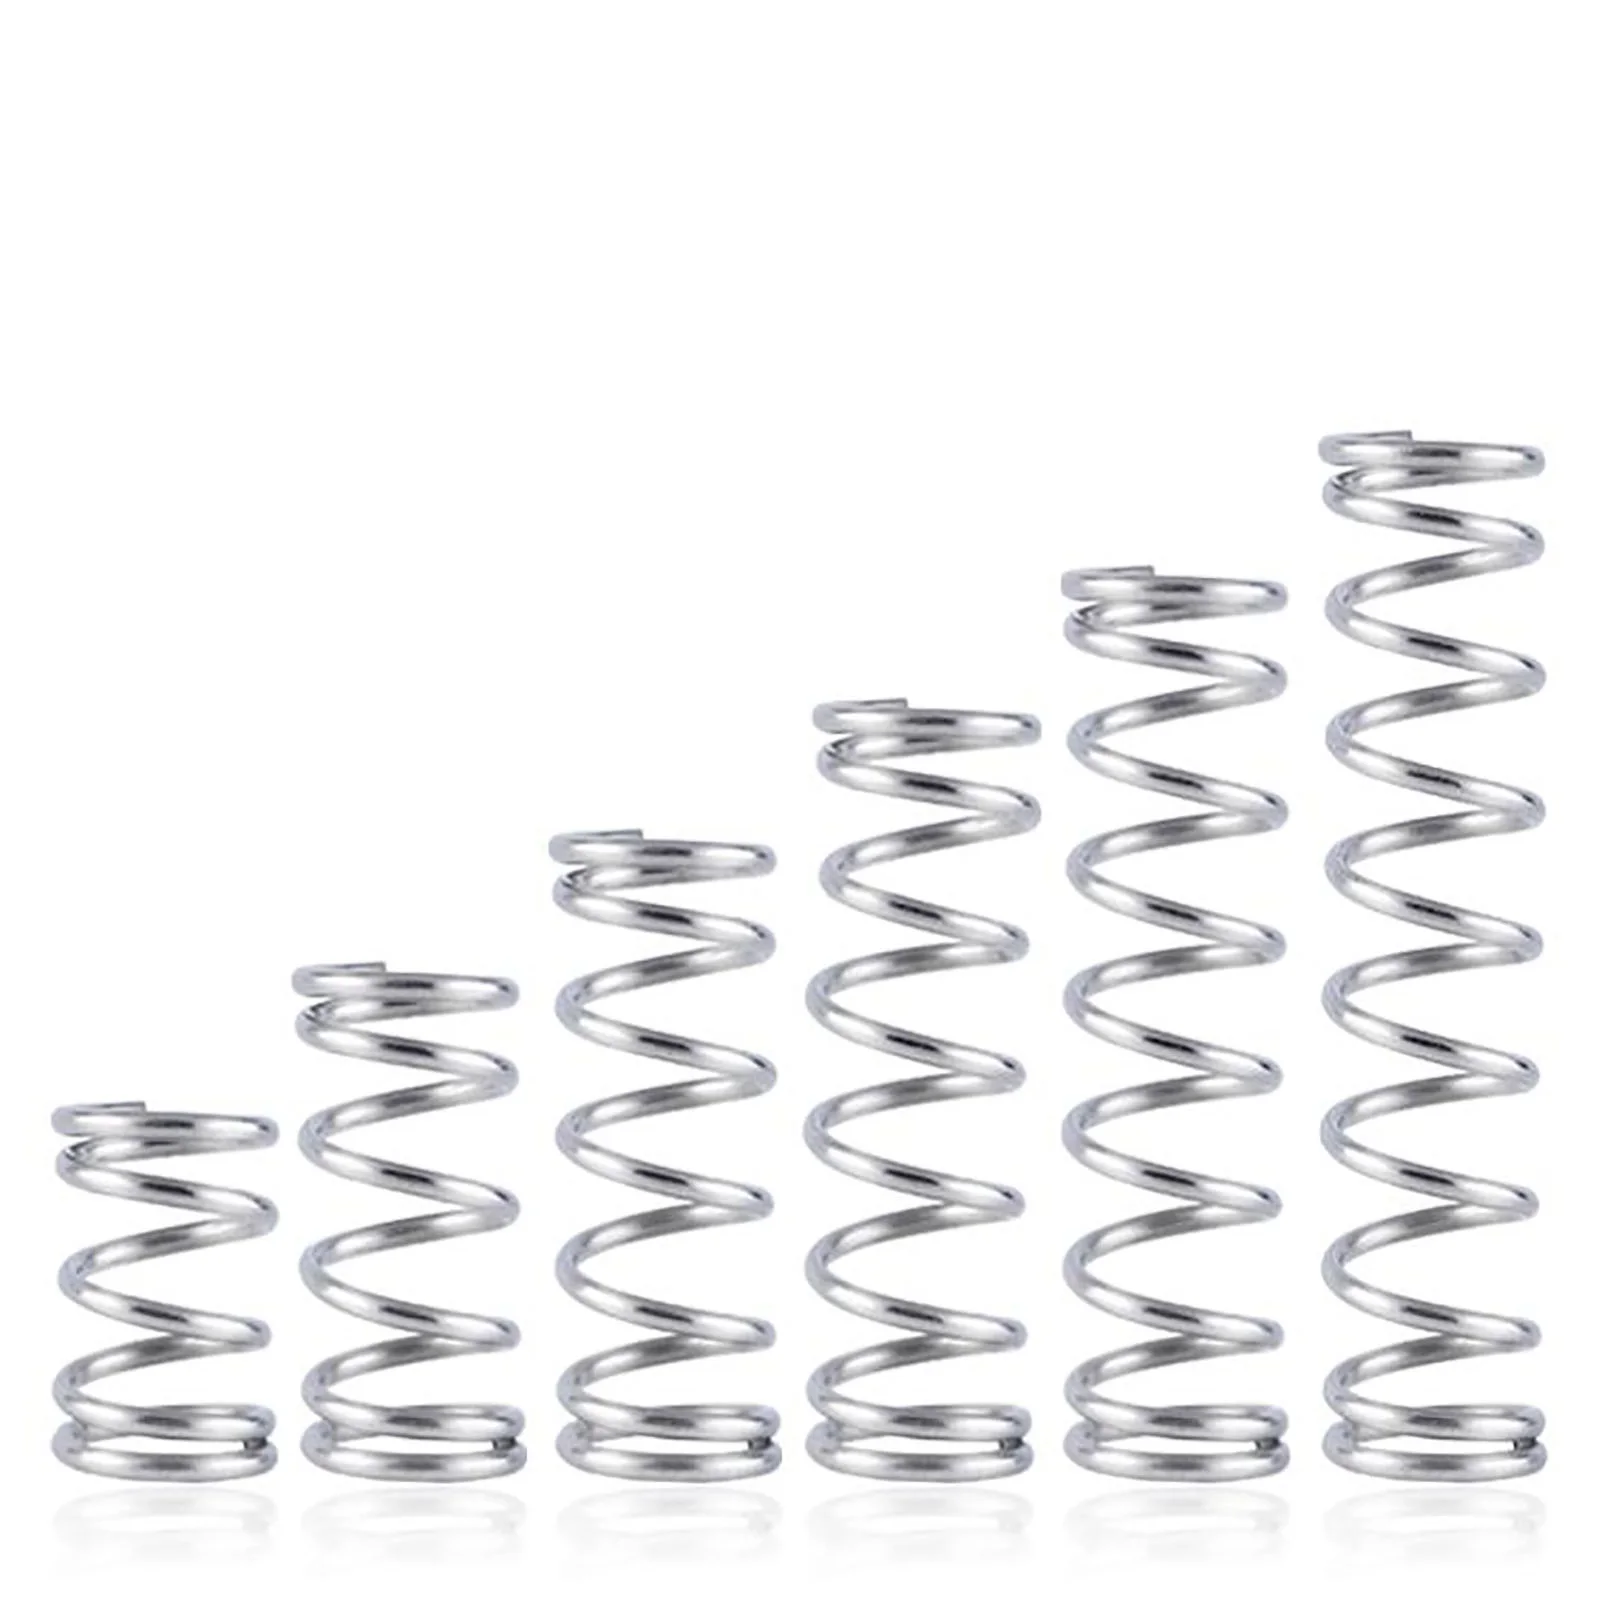 

5PCS 1.8x10mm Compression Spring, Wire Diameter 0.07'', Outer Diameter 0.39'', Free Length 0.39''-2'', Stainless Steel